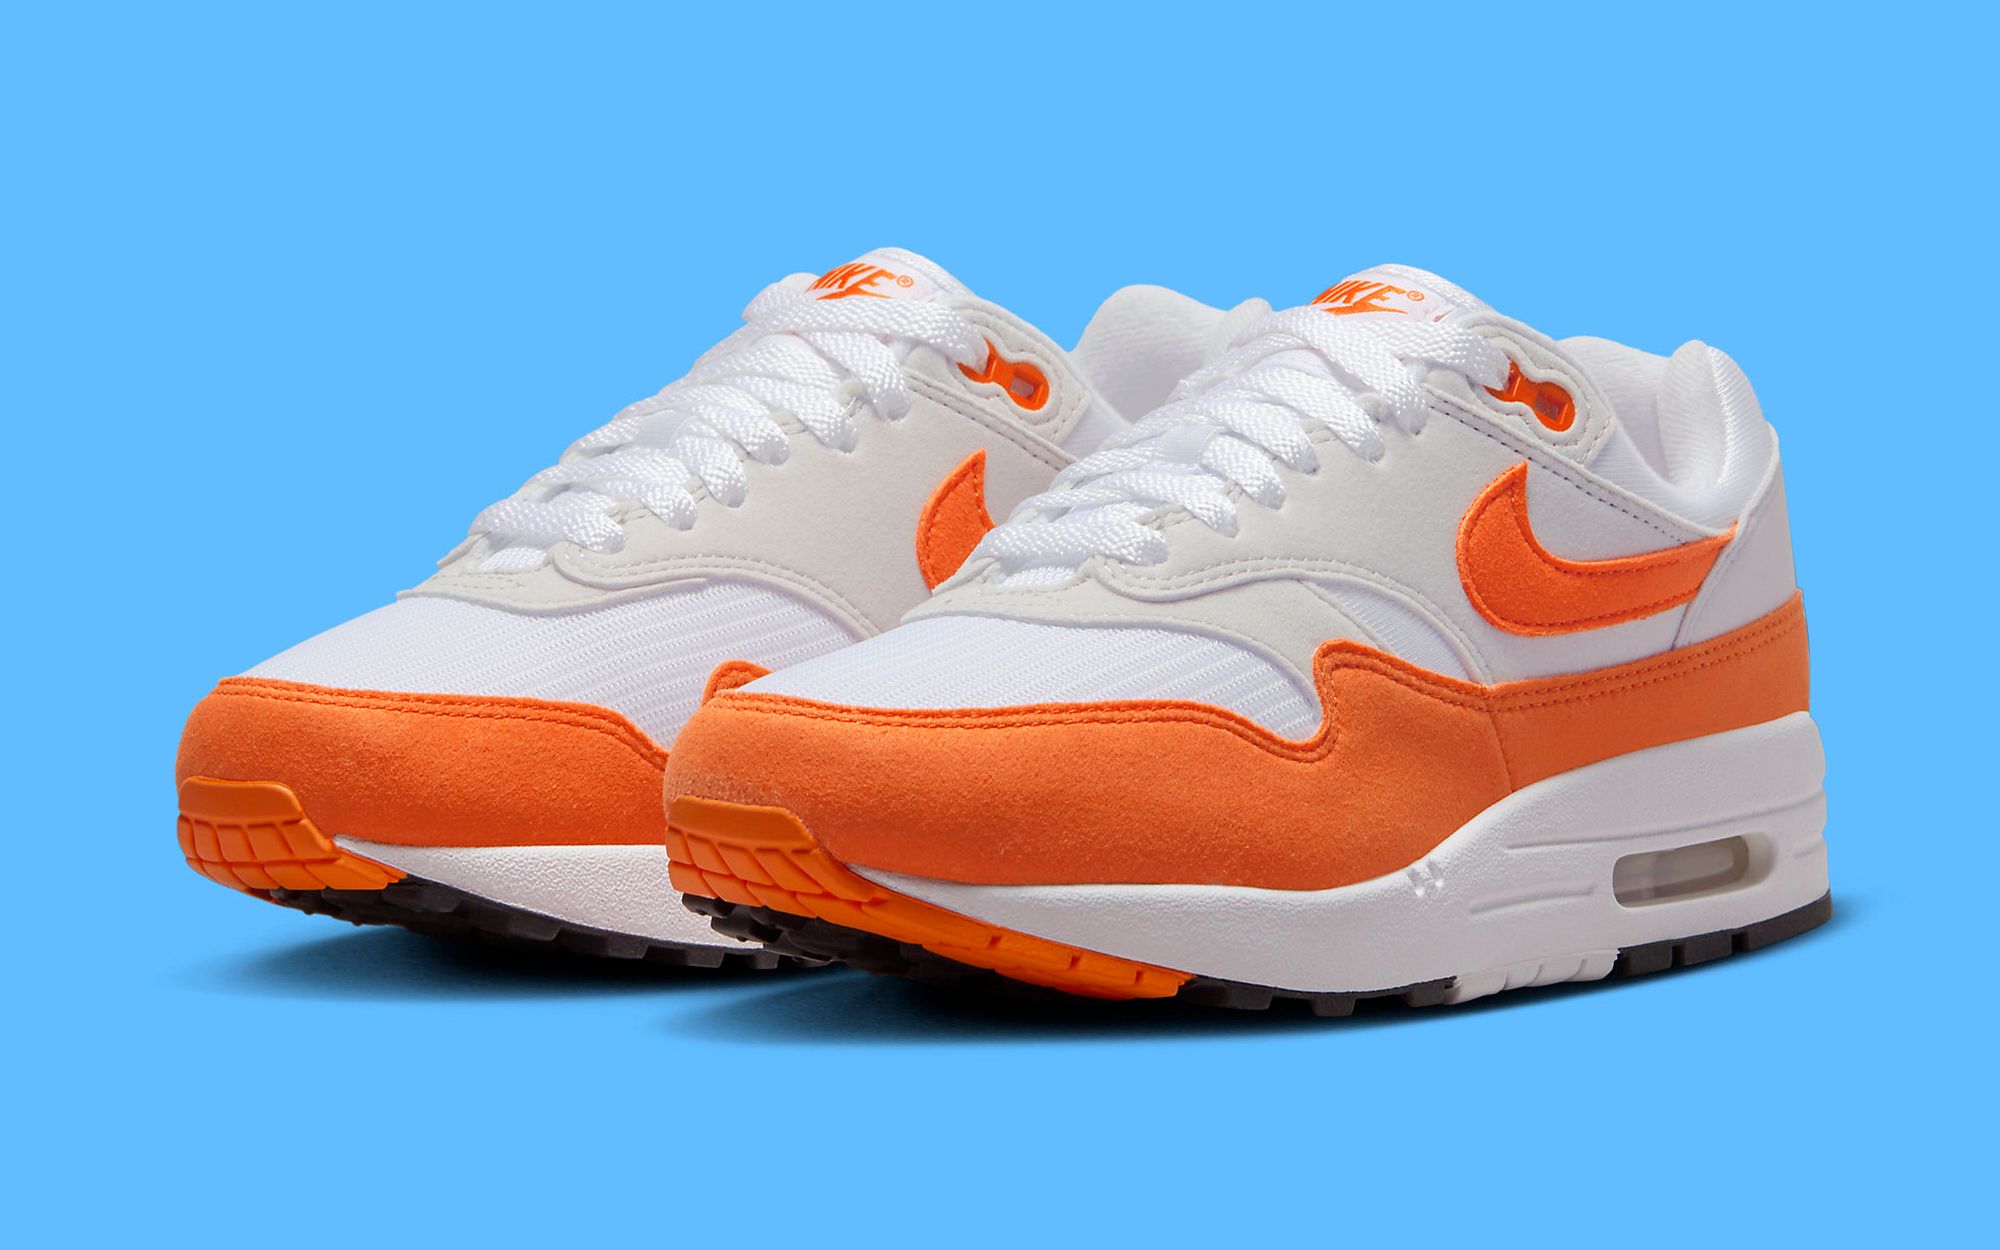 The Nike Air Max 1 “Safety Orange” Arrives October 27 | House of Heat°